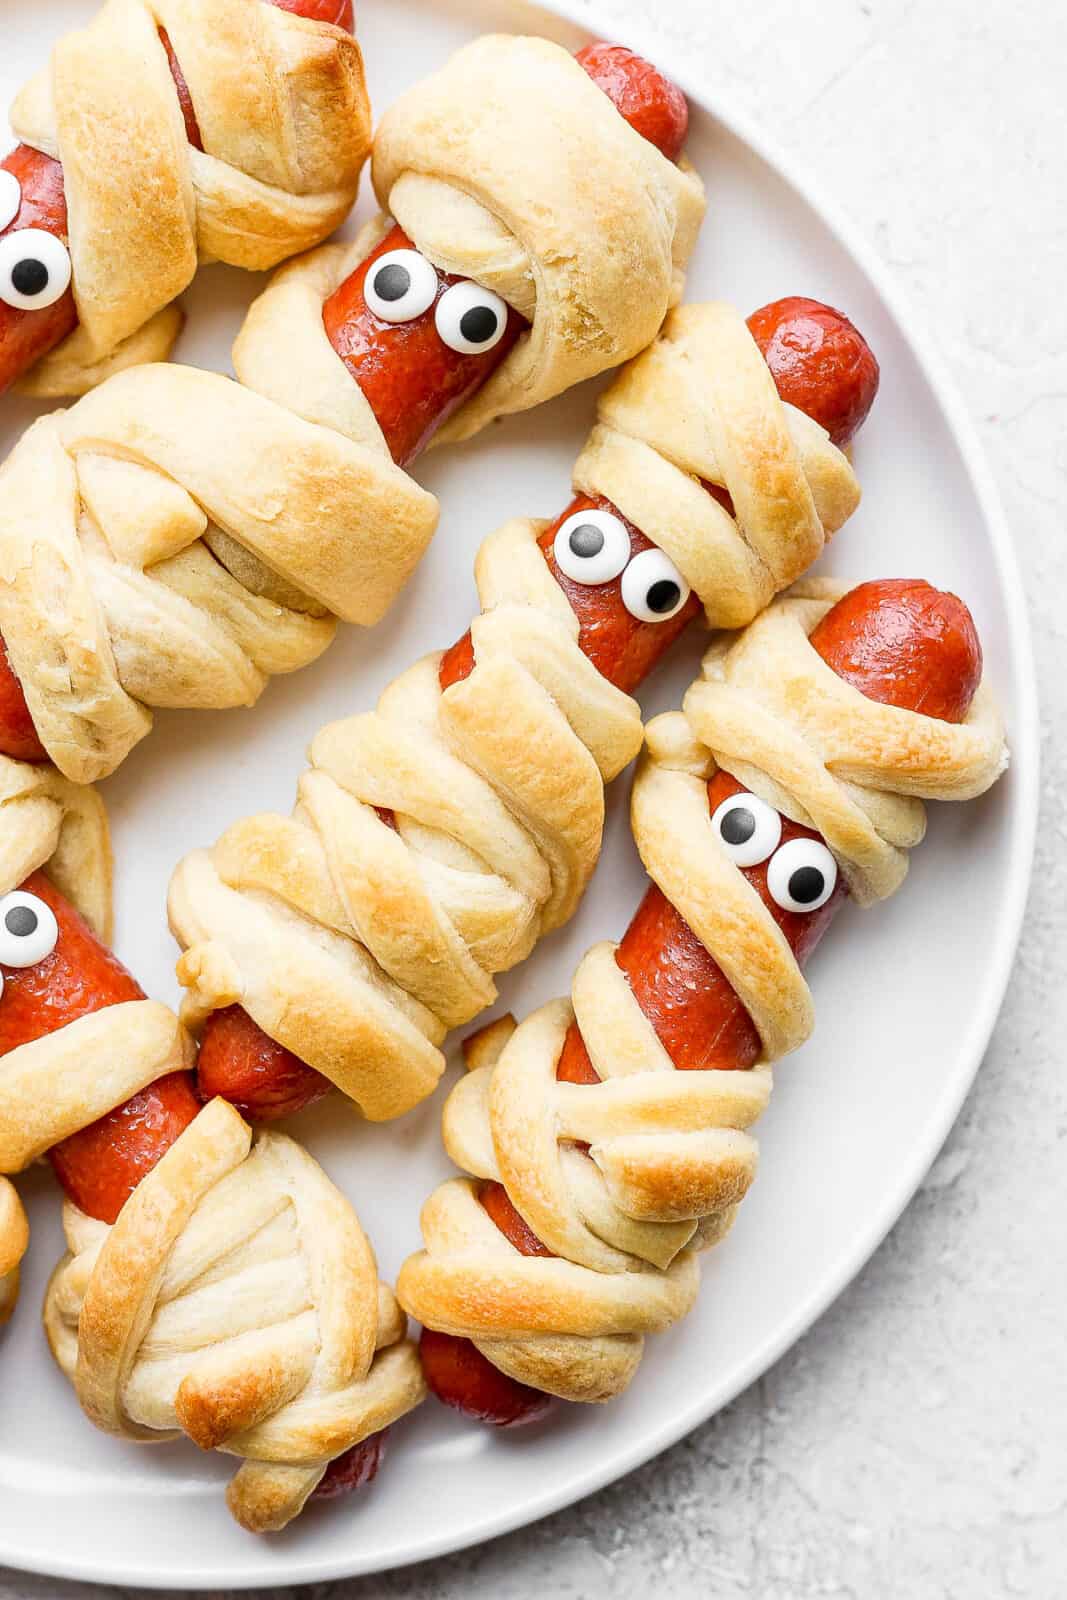 Plate of Mummy Hot Dogs with candy eyes.